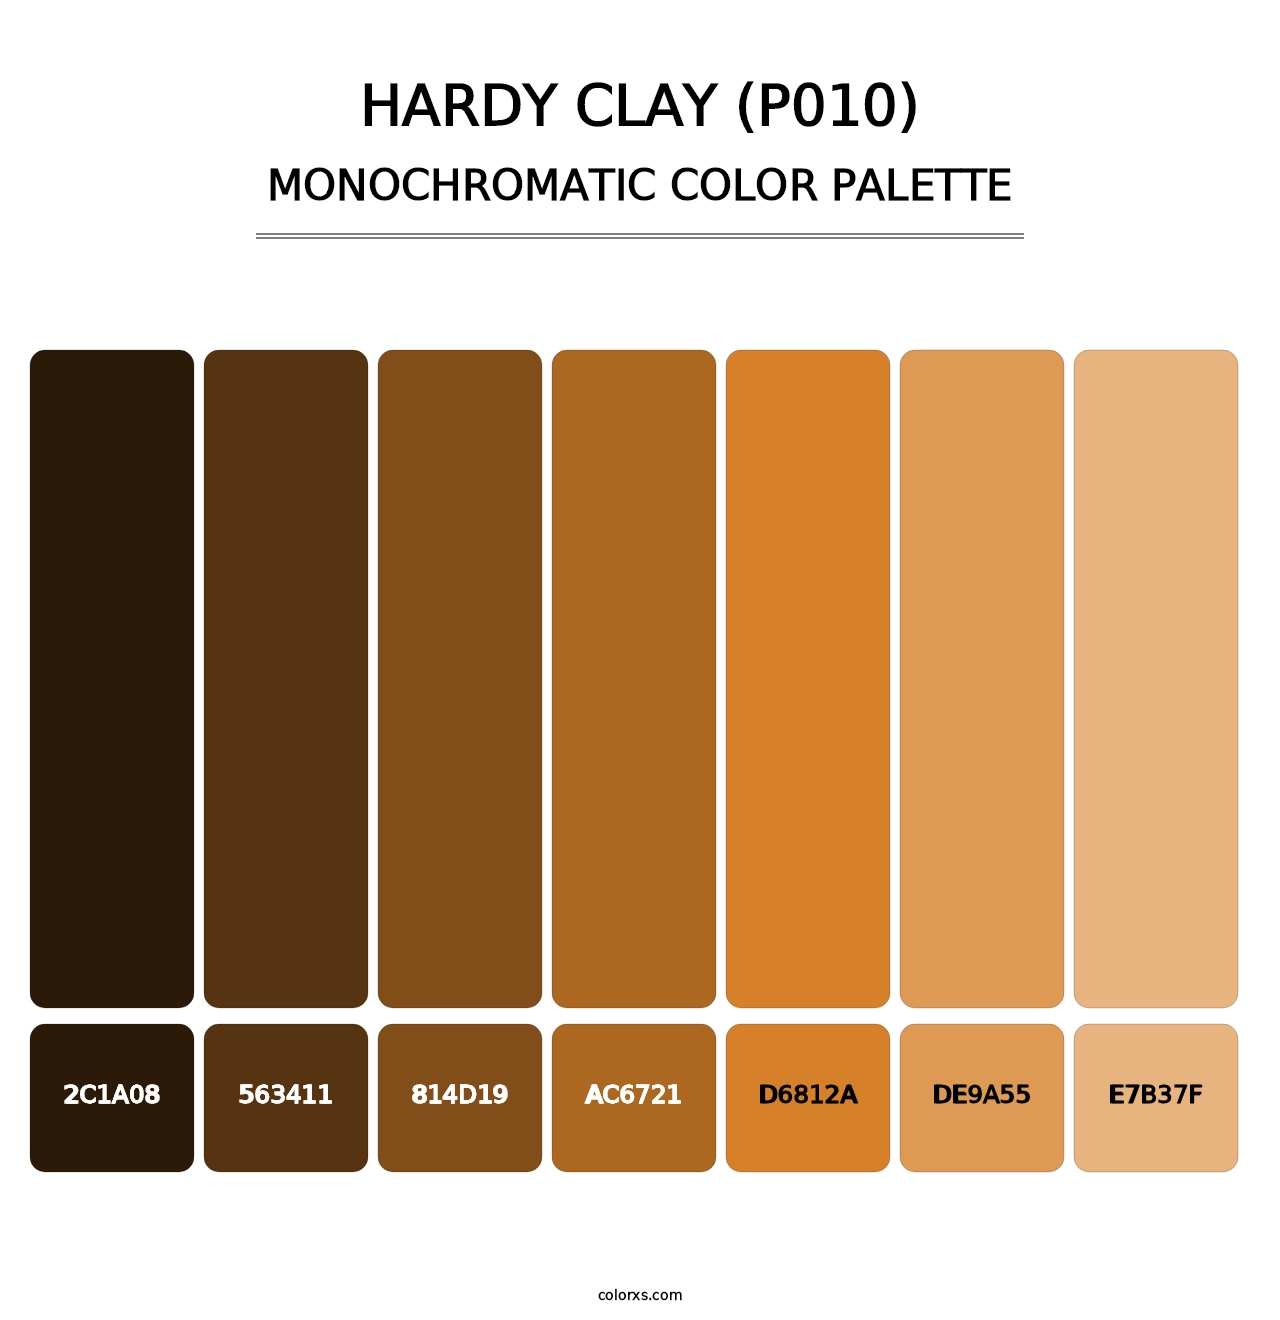 Hardy Clay (P010) - Monochromatic Color Palette